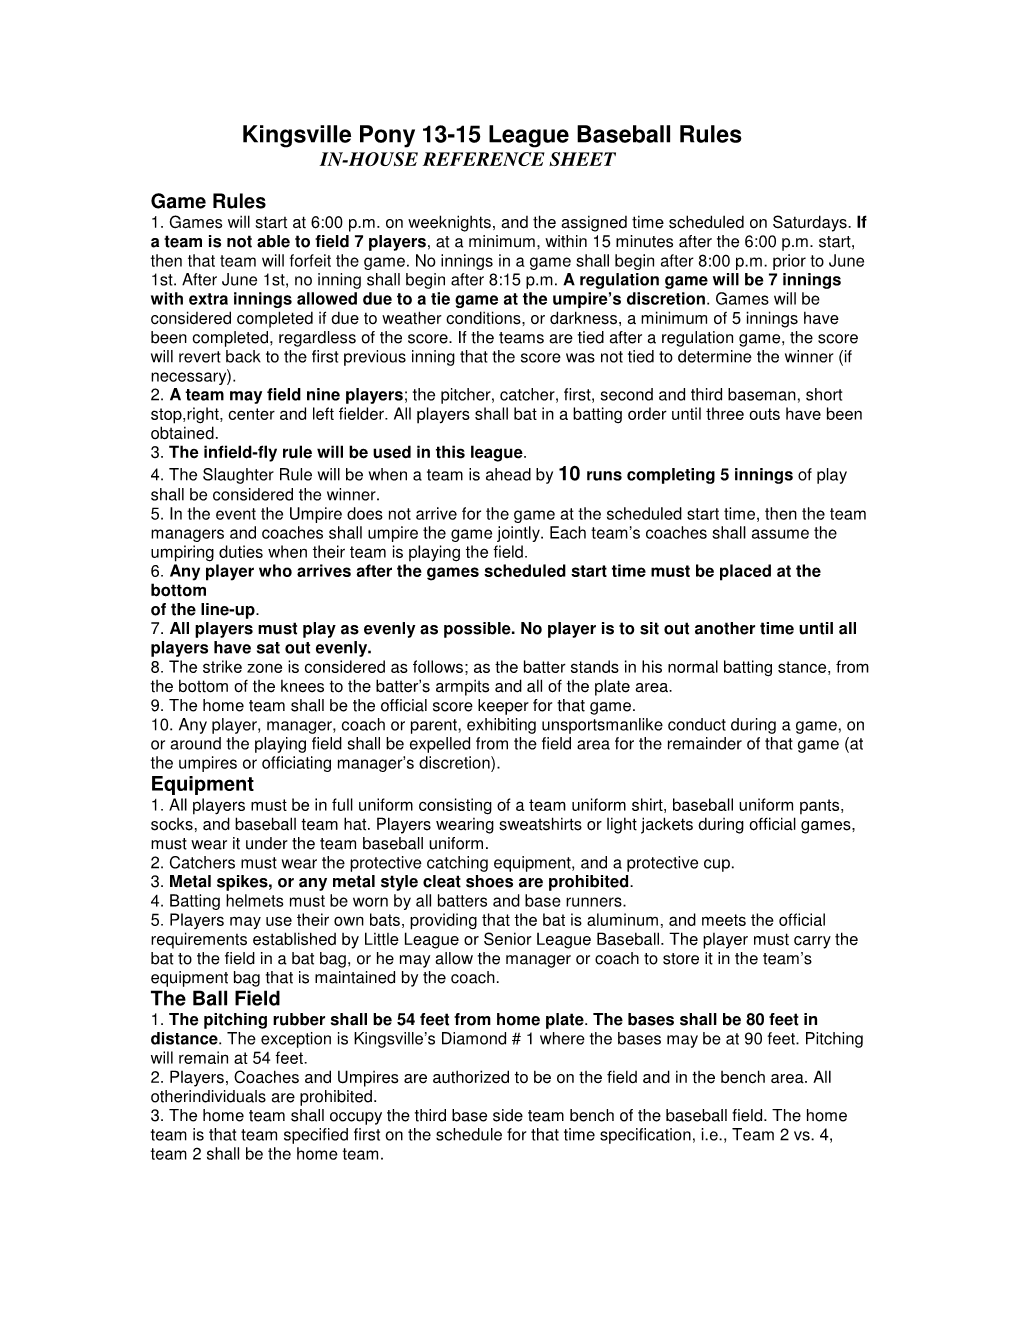 Kingsville Pony 13-15 League Baseball Rules IN-HOUSE REFERENCE SHEET